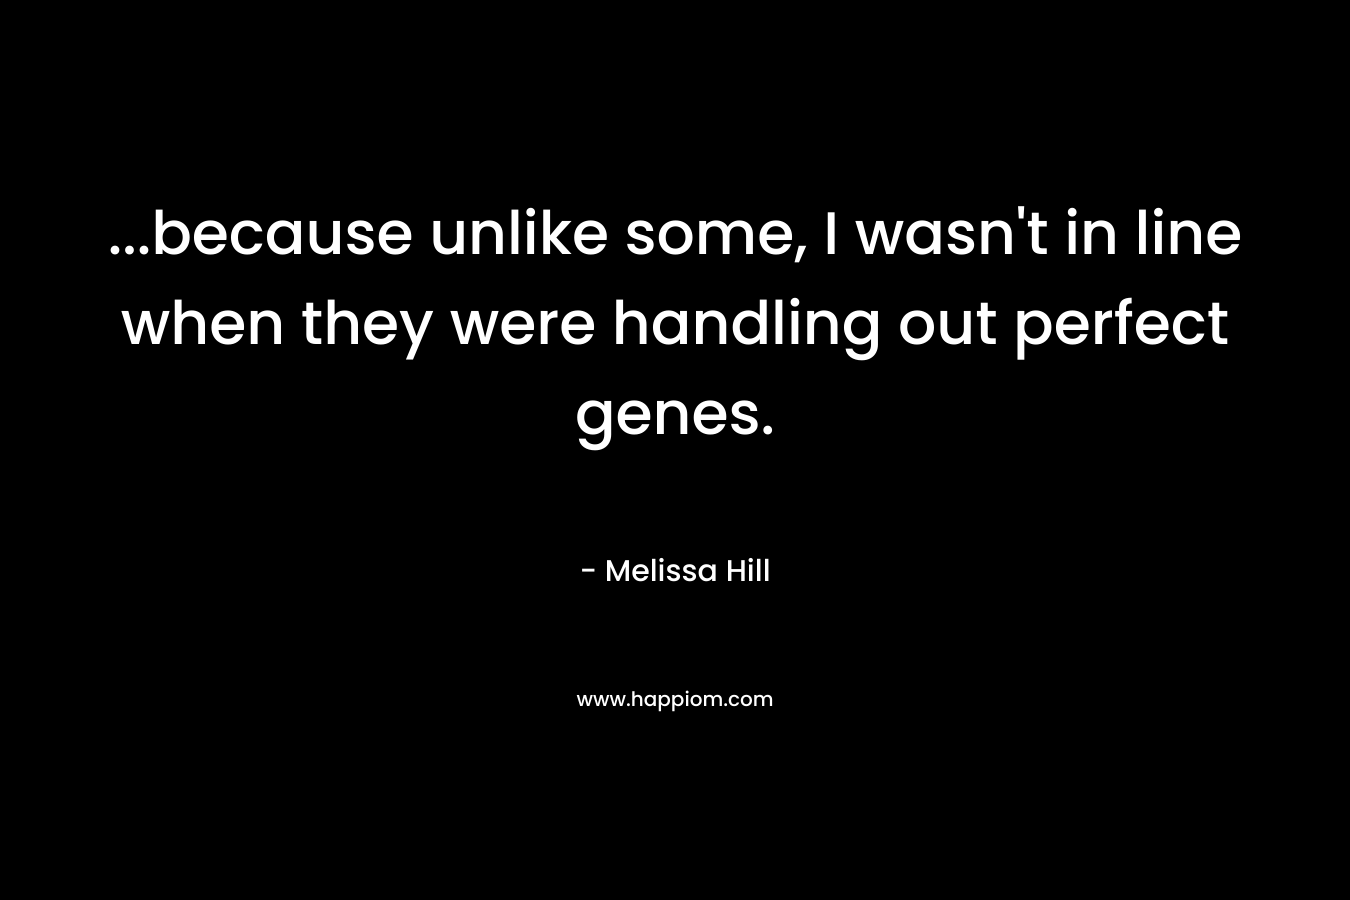 …because unlike some, I wasn’t in line when they were handling out perfect genes. – Melissa Hill